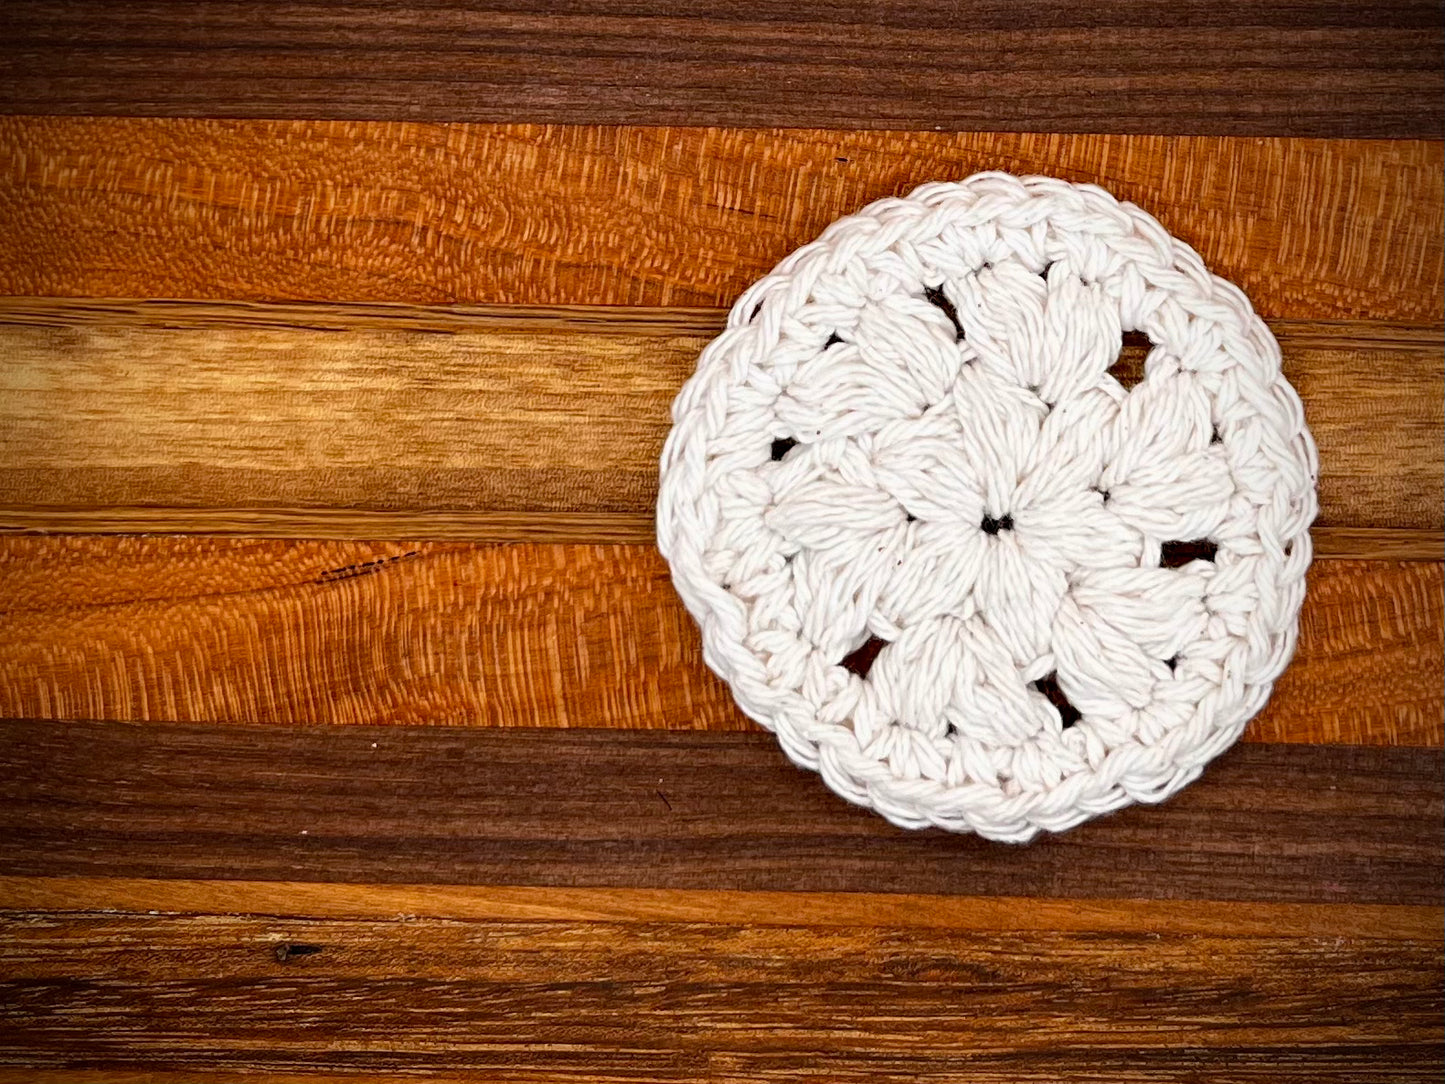 100% Cotton Crocheted Face Cleansing Pad - Reusable and Eco-Friendly